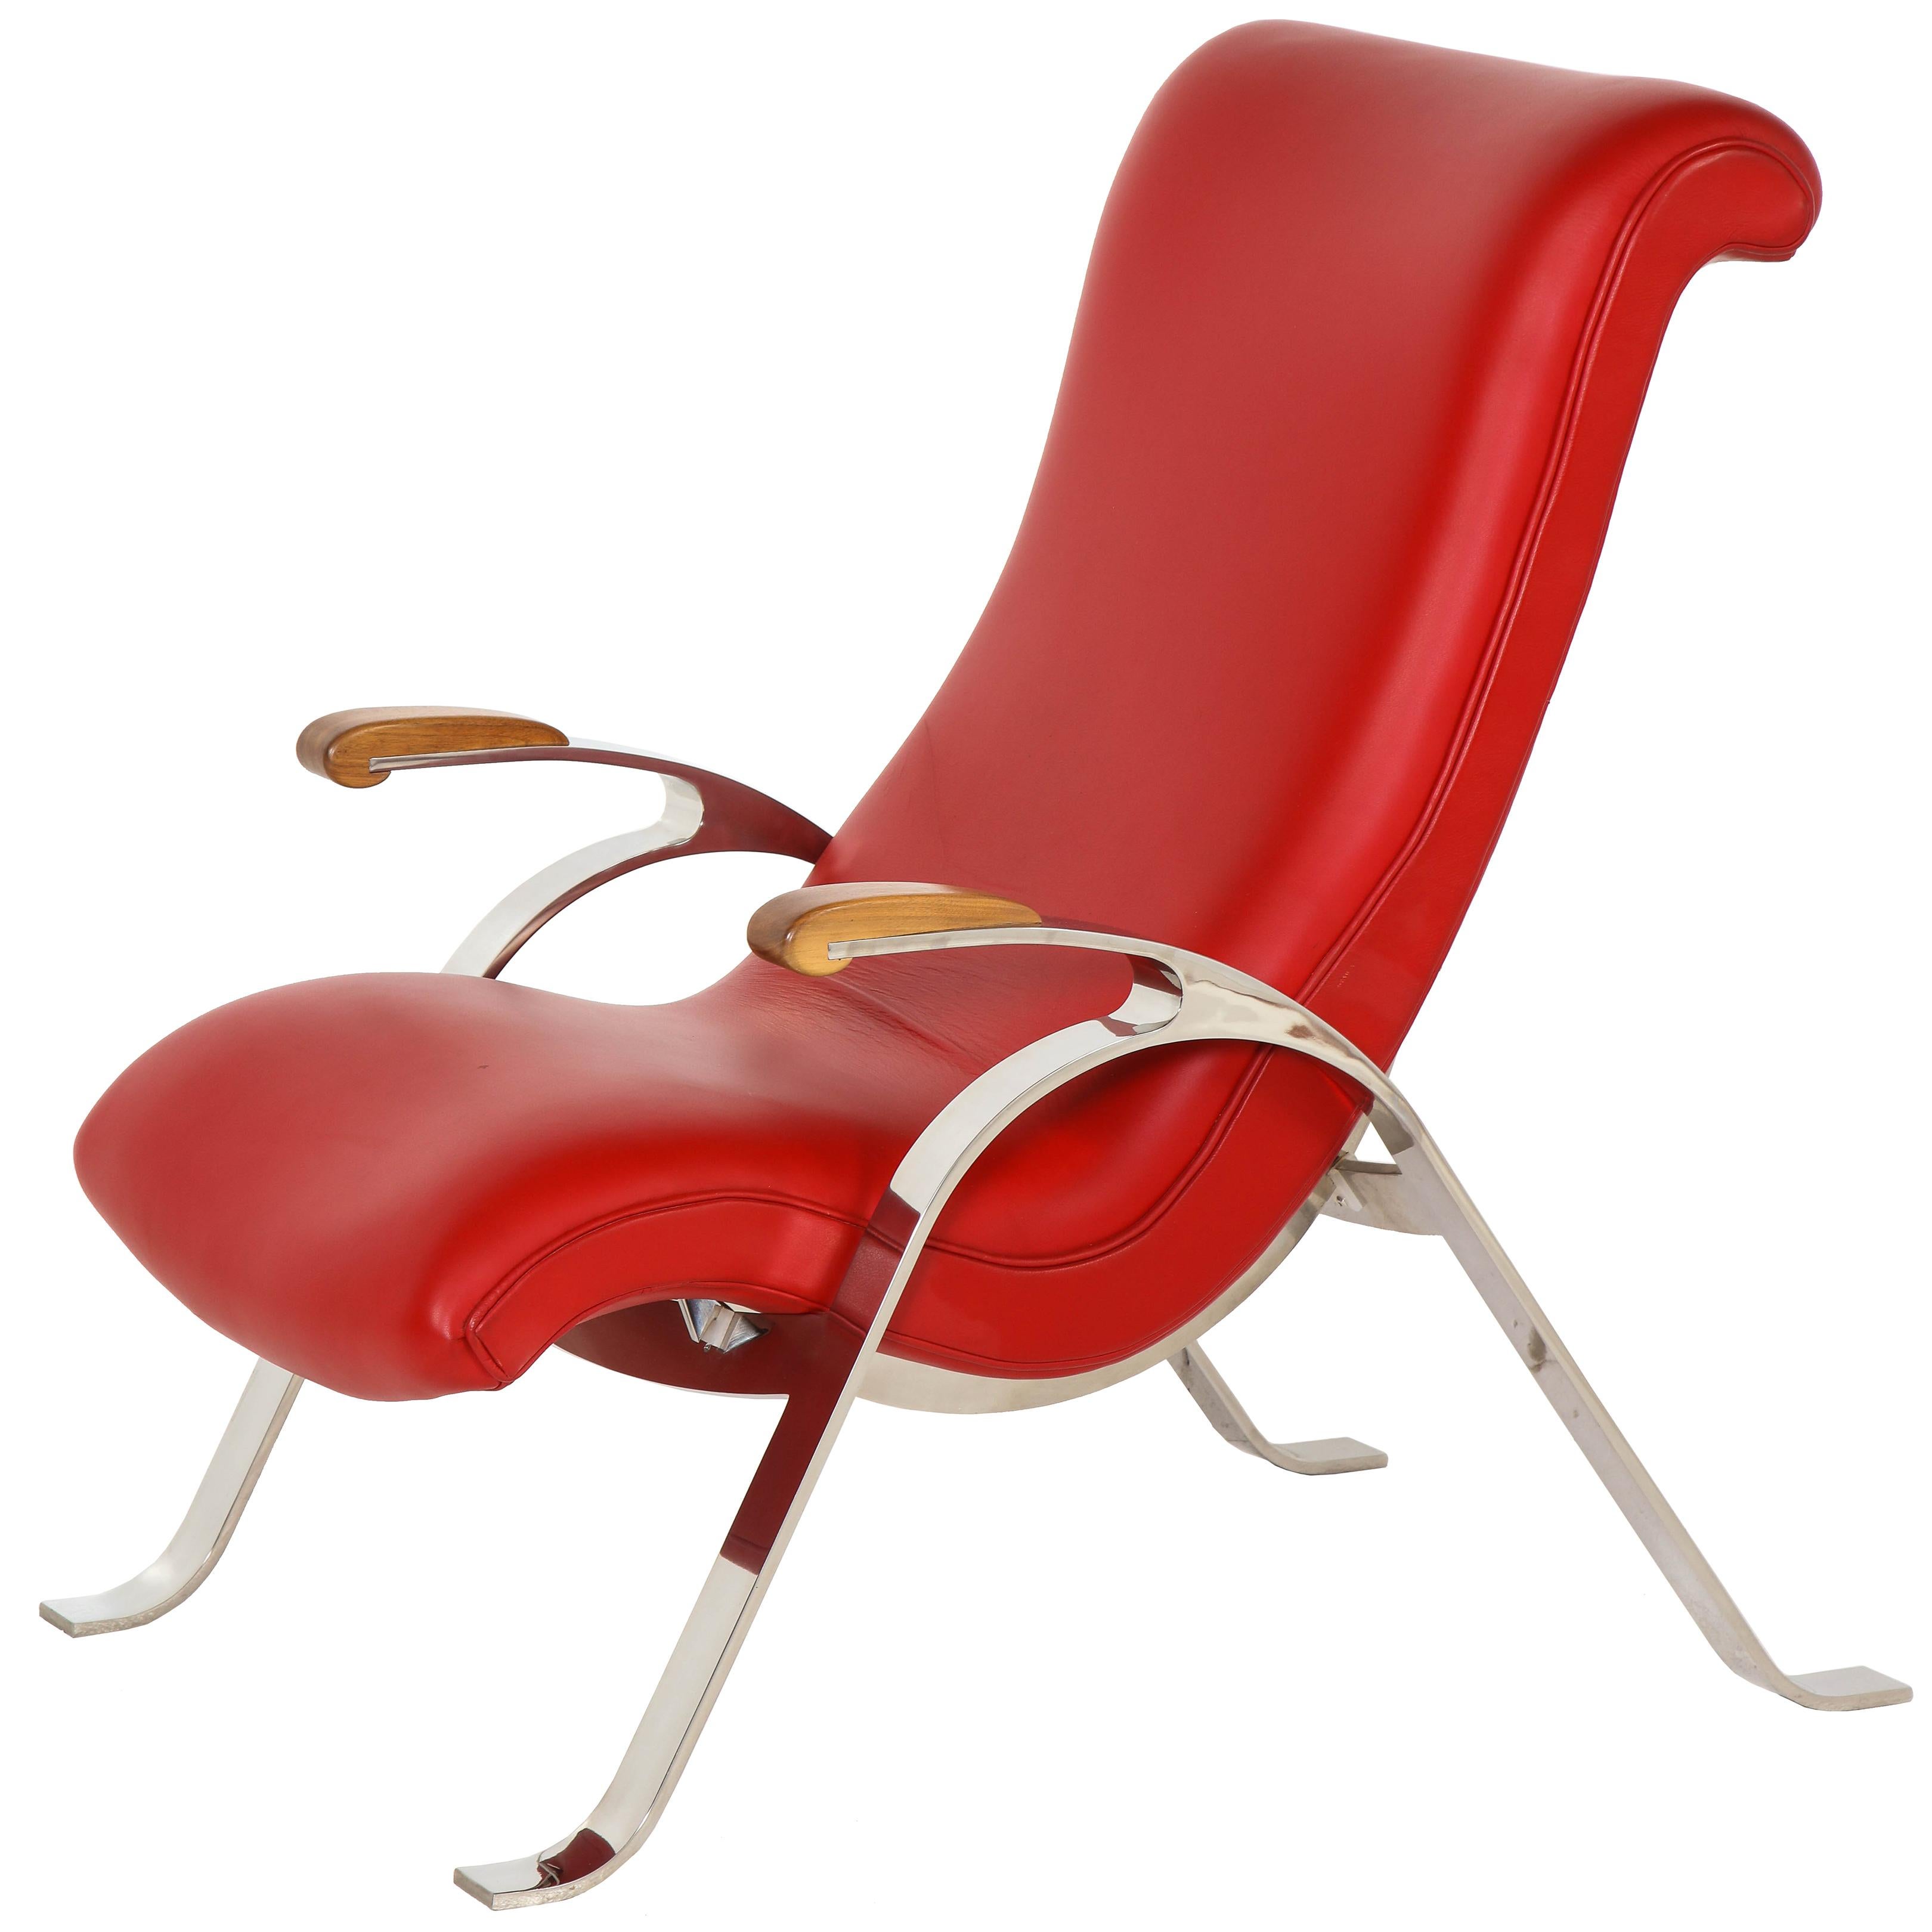 Multi-Position Reclining Chair in Red Offered by Vladimir Kagan Design Group